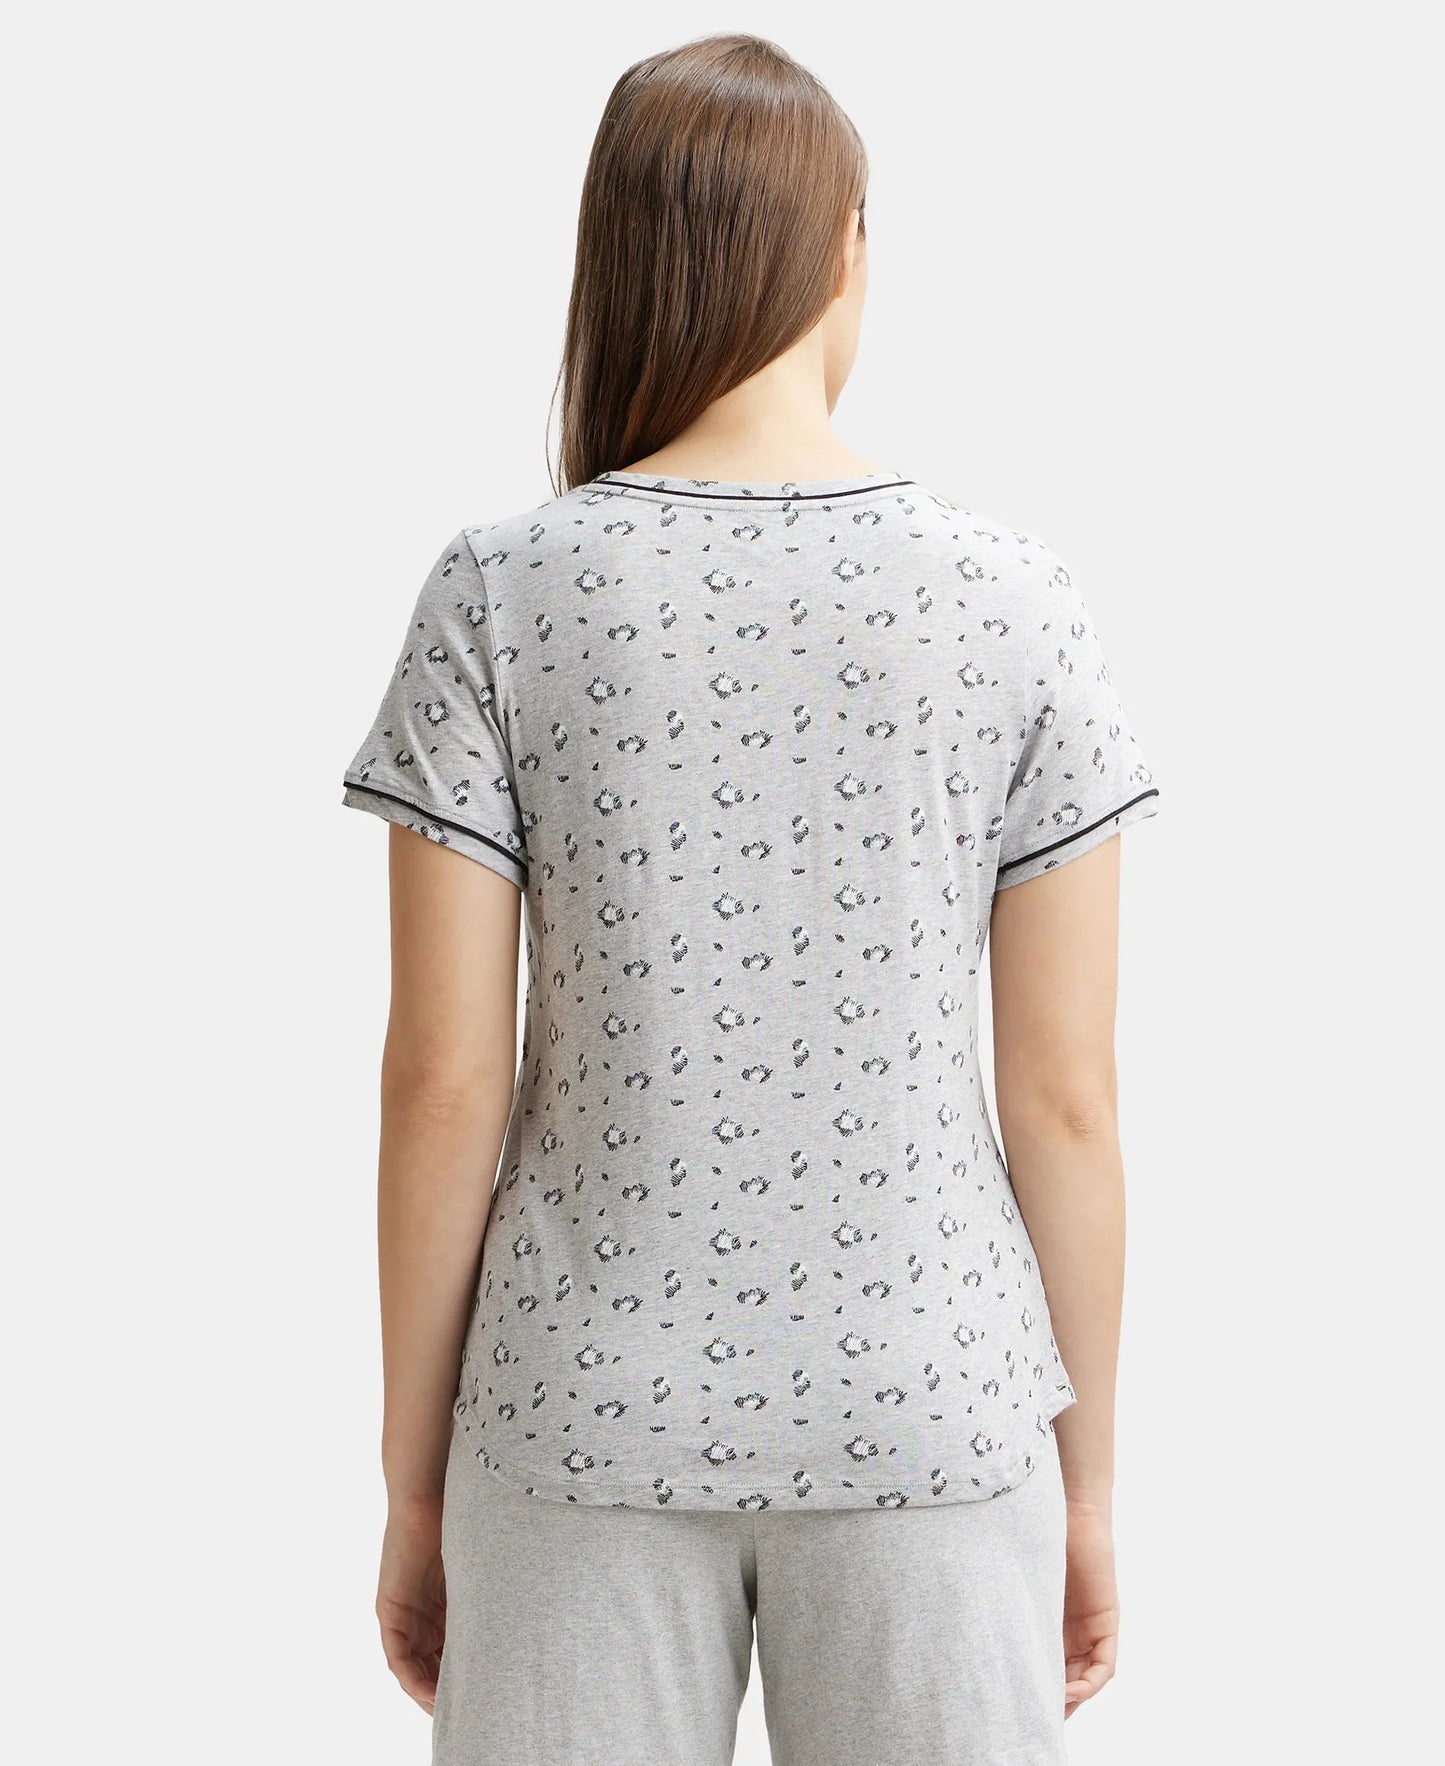 Super Combed Cotton Relaxed Fit Printed Round Neck Half Sleeve T-Shirt with Contrast Piping Design - Light Grey Melange-3